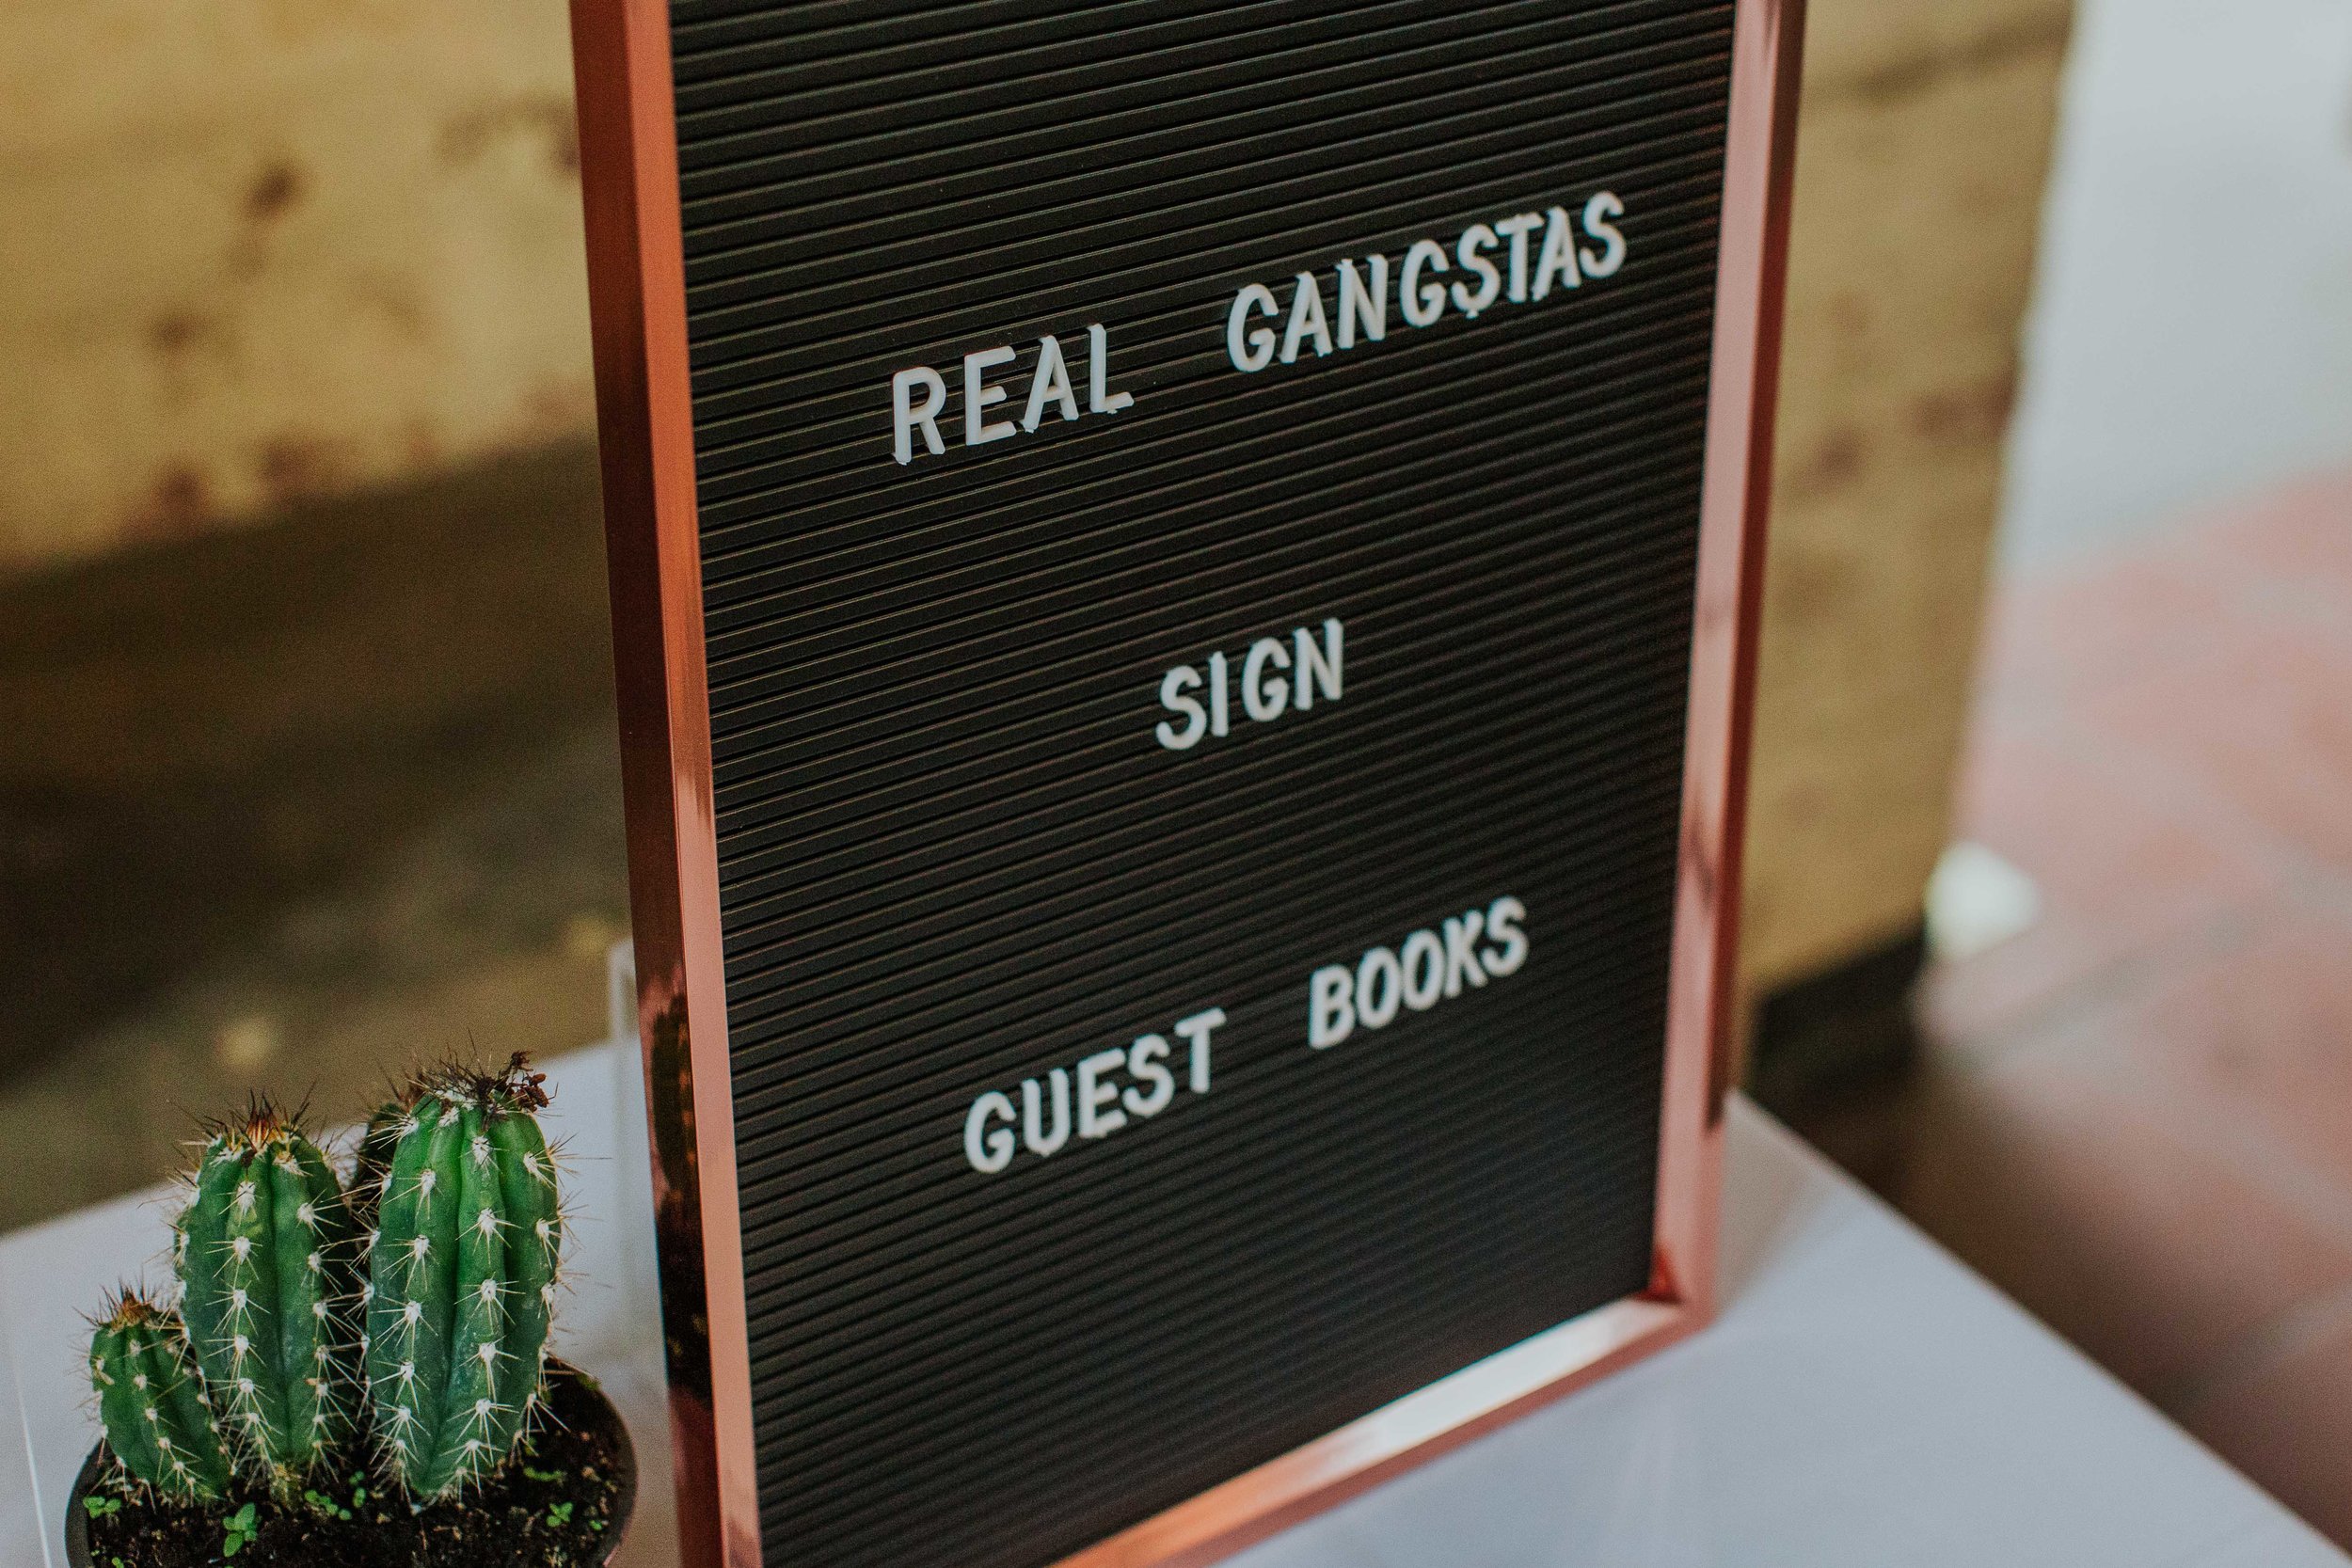 real gangsters sign guestbooks